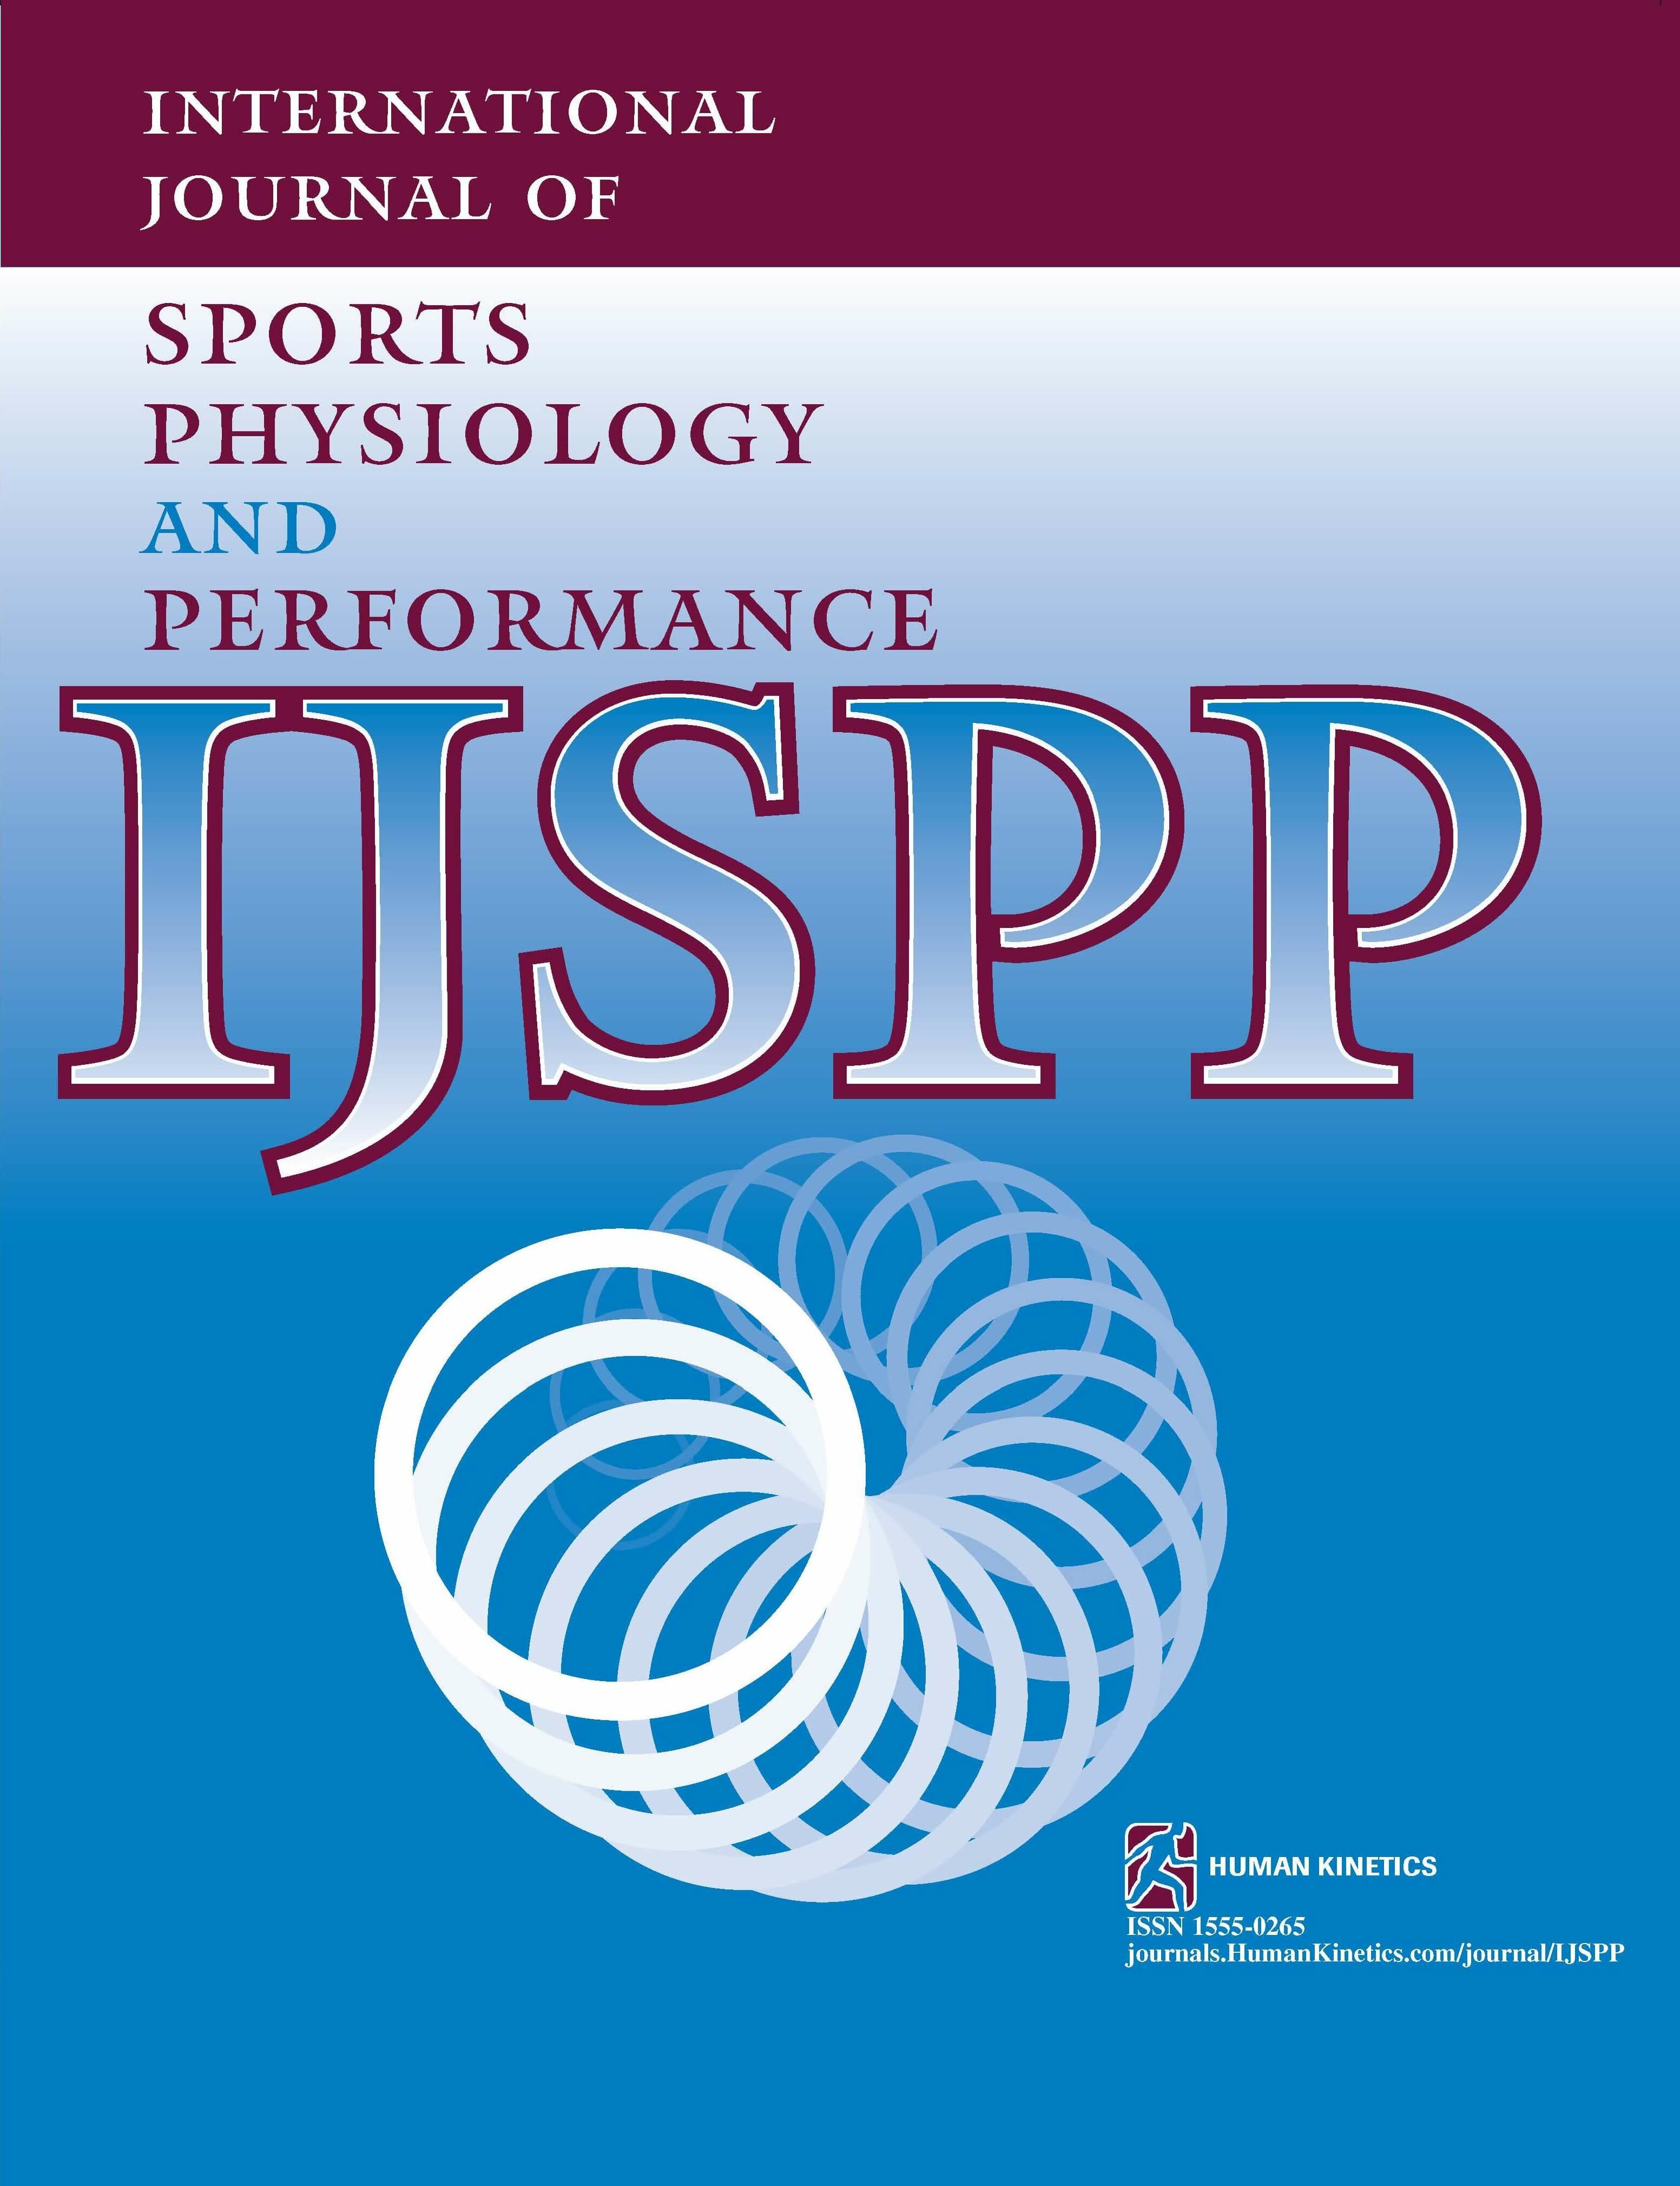 Isokinetic Leg-Press Power–Force–Velocity Profiles Are Reliable in Male and Female Elite Athletes but Not Interchangeable With Vertical Jump Profiles